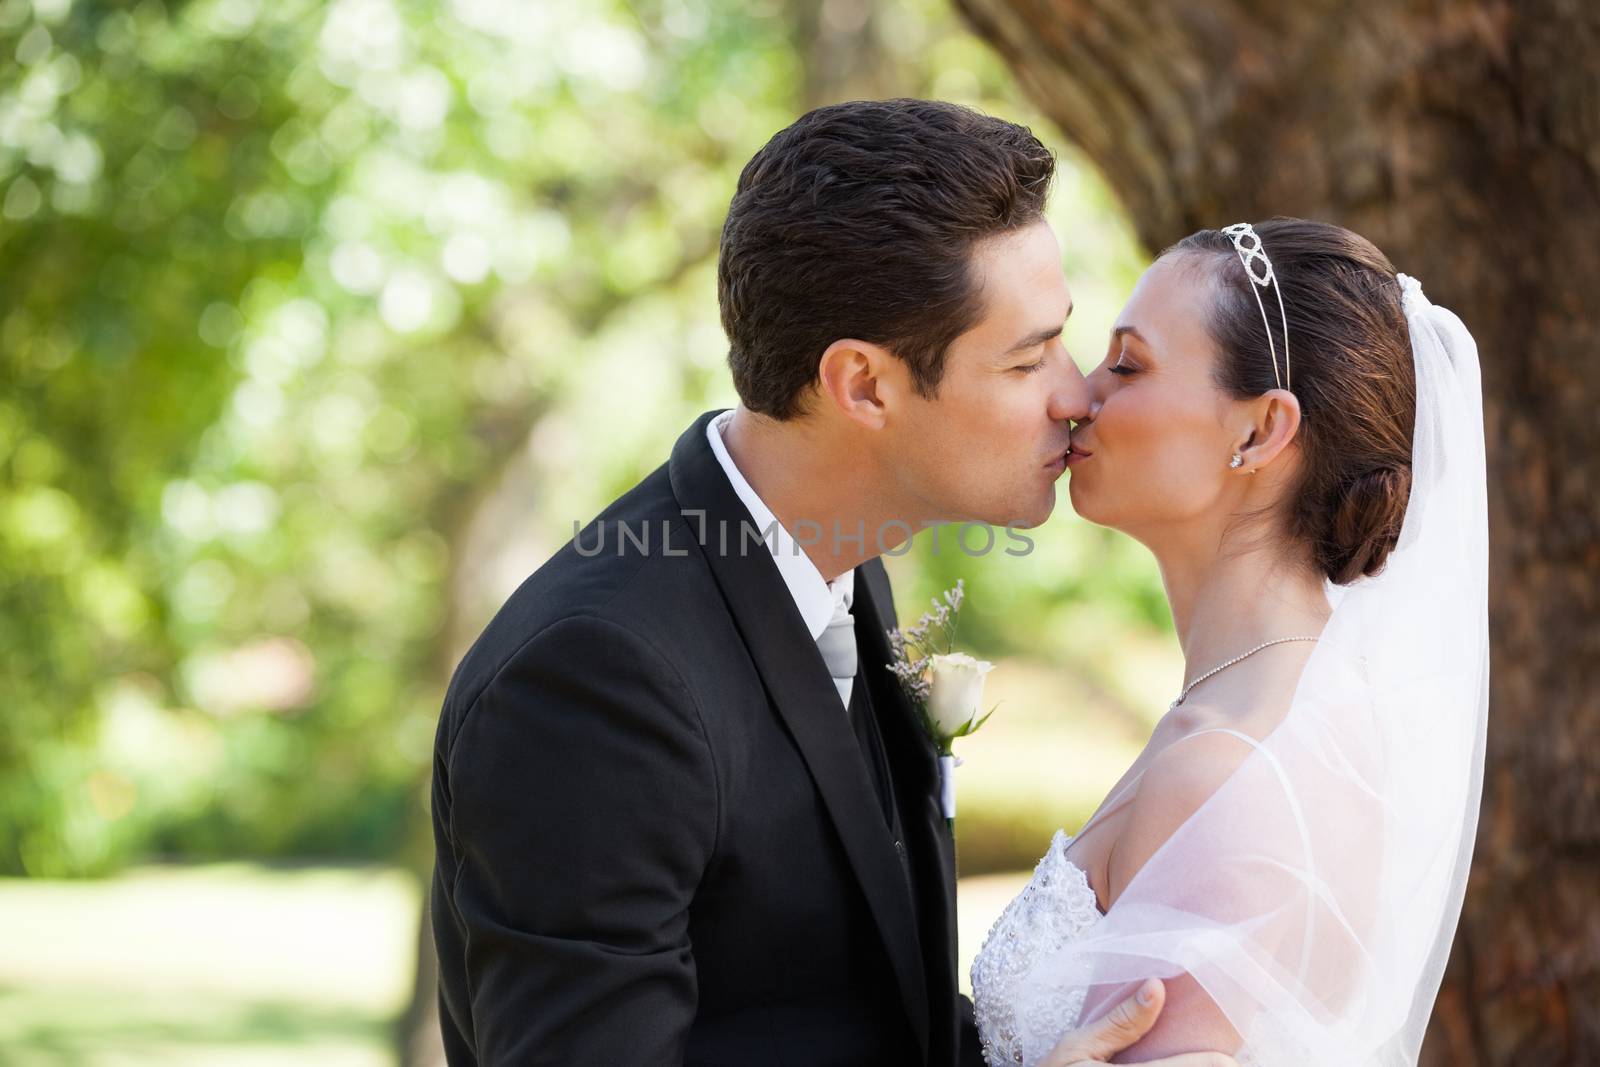 Romantic newlywed couple kissing in park by Wavebreakmedia